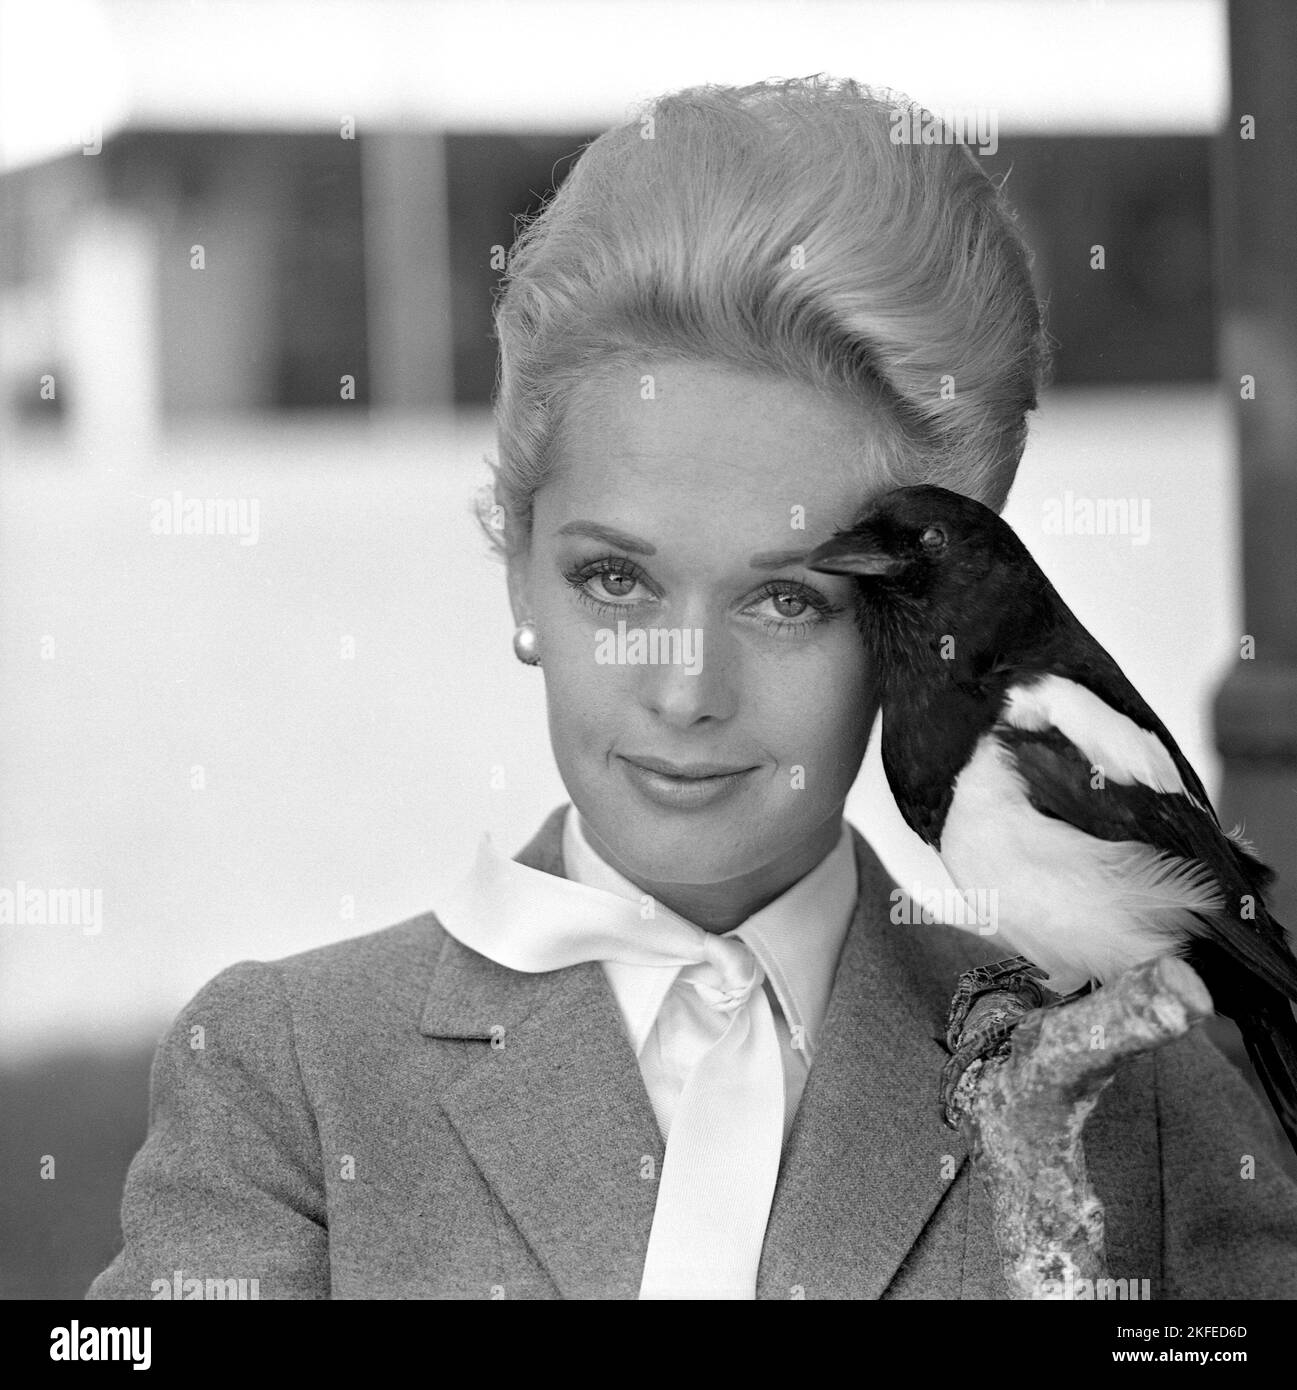 Tippi Hedren. American actress, born january 19 1930. She was discovered by film director Alfred Hitchcock and achieved great praise for her work in the suspense-thriller The Birds 1963. Pictured when visiting Sweden to promote the film. Stock Photo